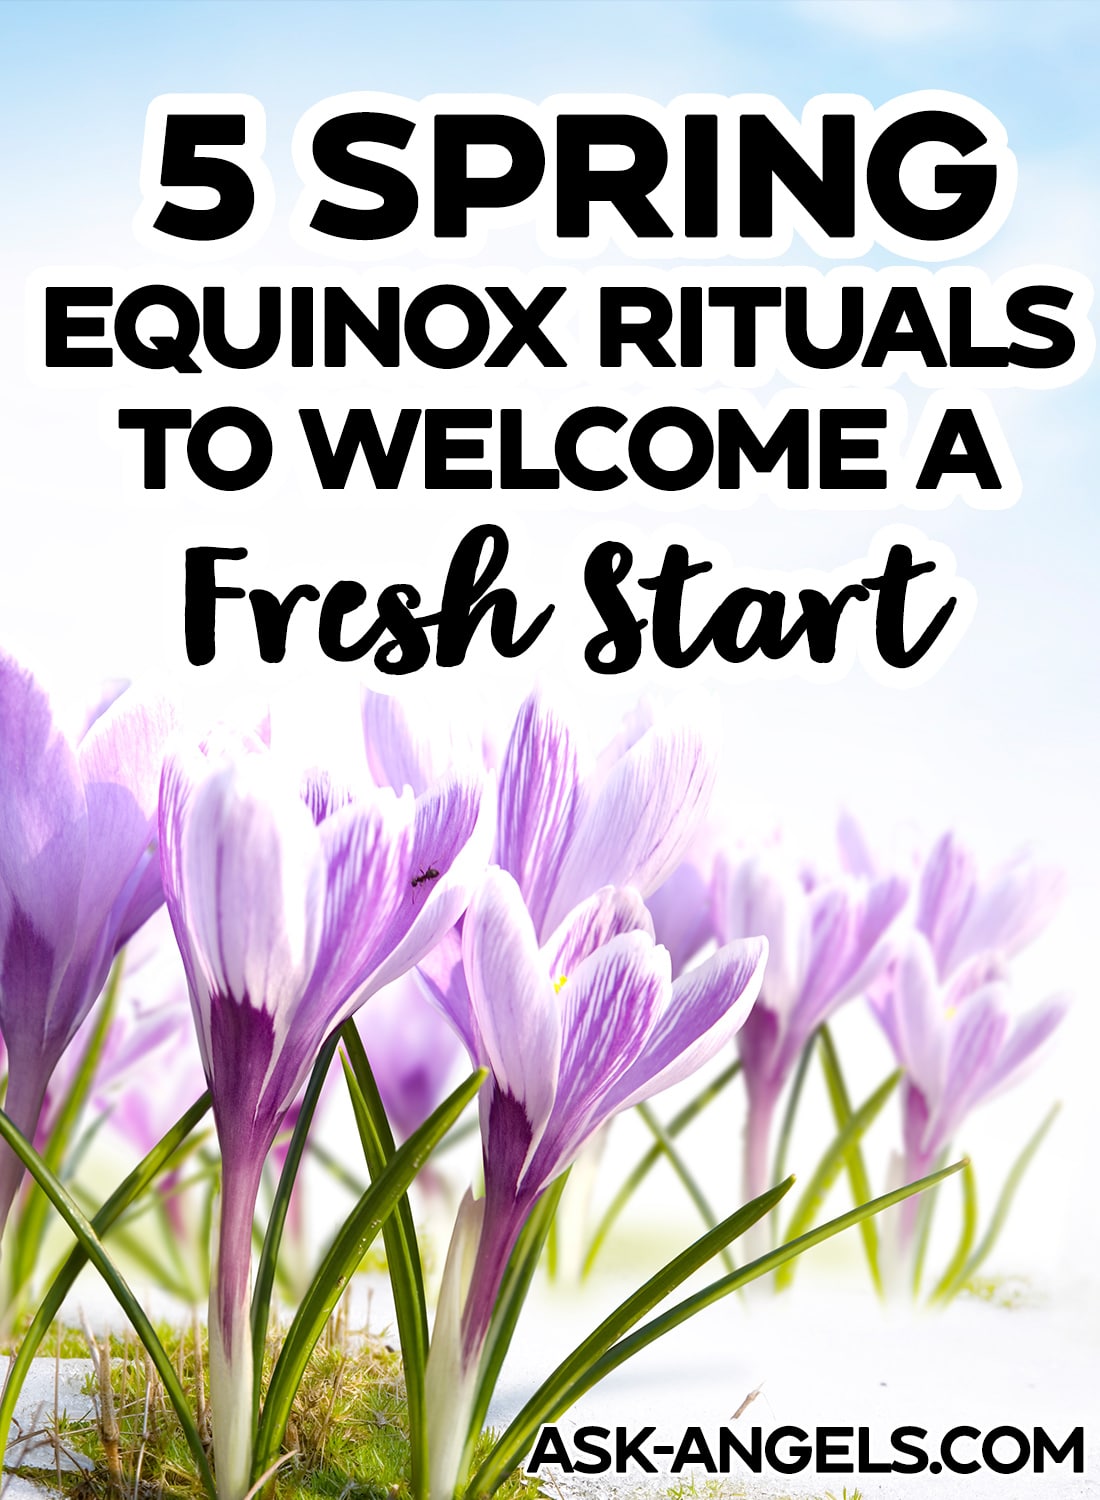 5 Spring Equinox Rituals to Welcome a Fresh Start